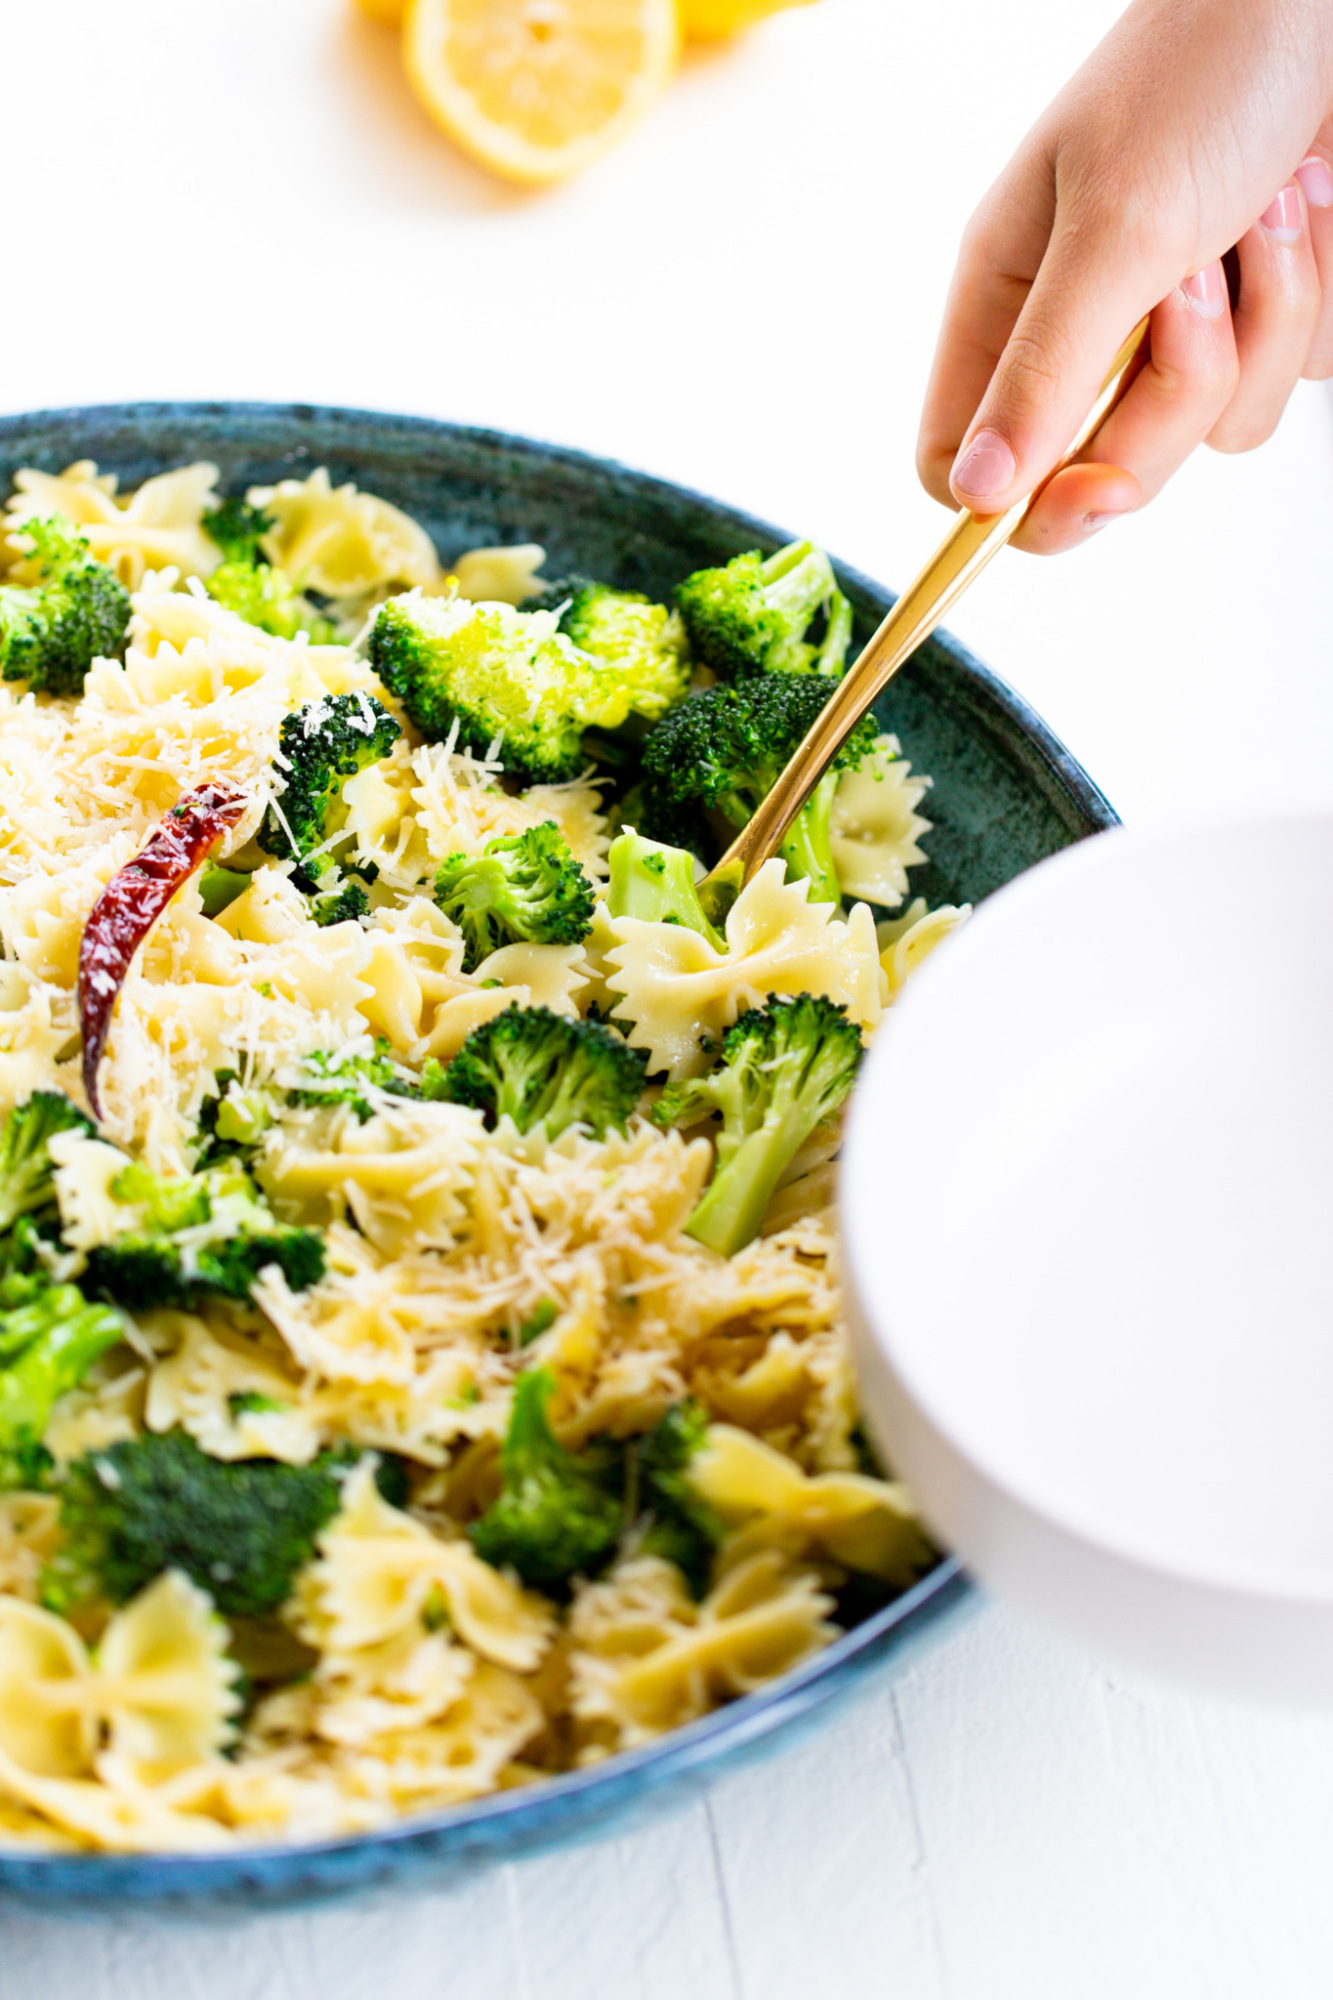 EASY ONE POT PASTA WITH BROCCOLI